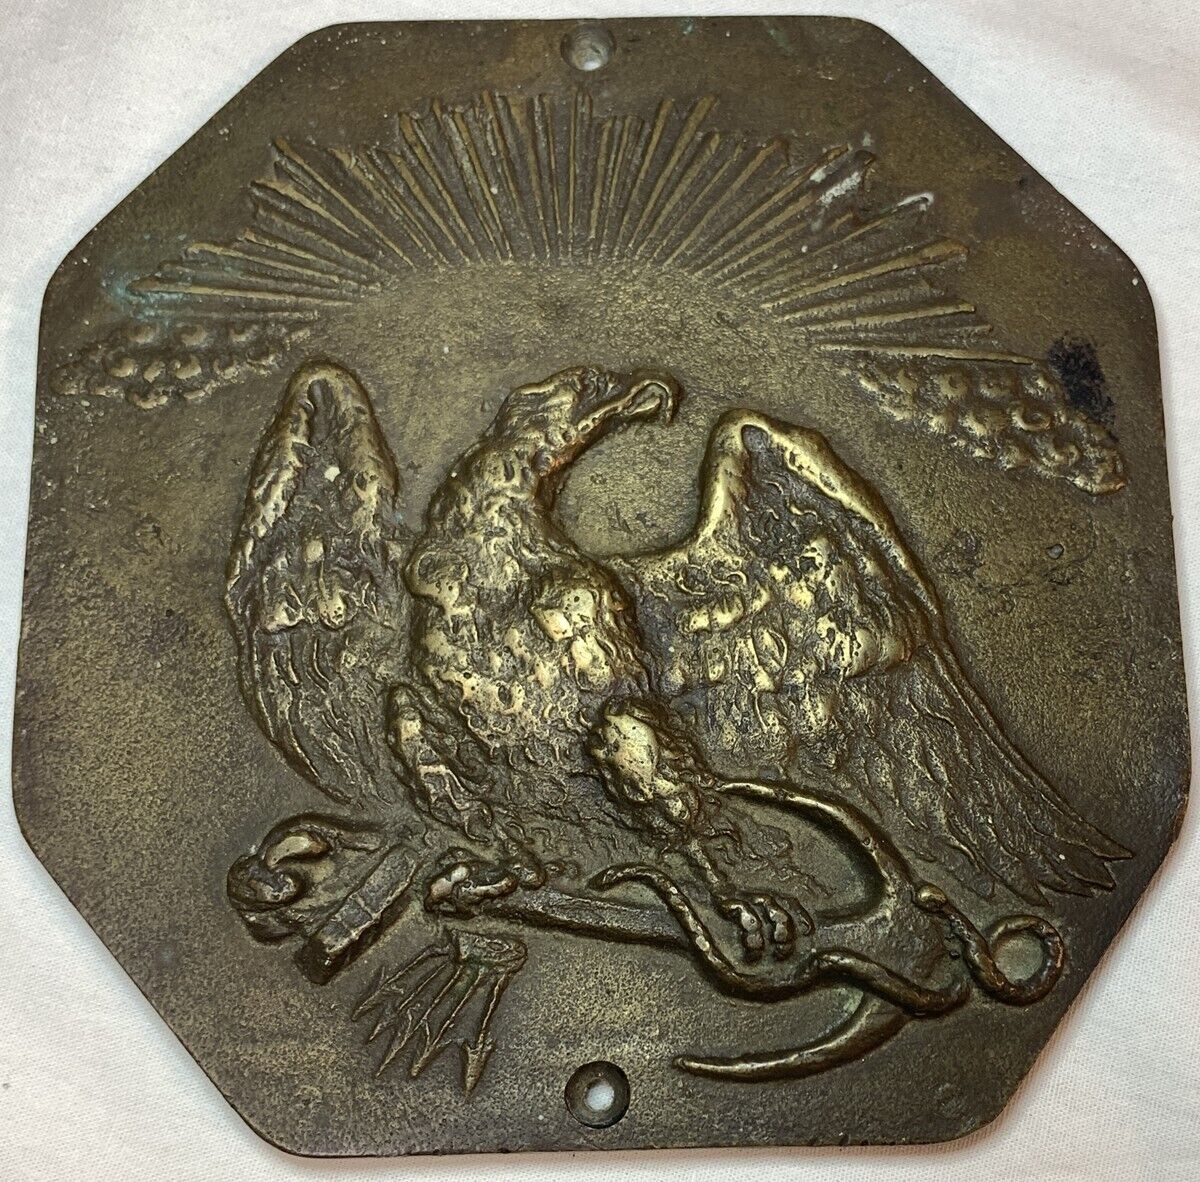 Rare Antique Bronze Fire Mark 19th C Eagle With Anchor And Sunrise Rays 6 1/2"